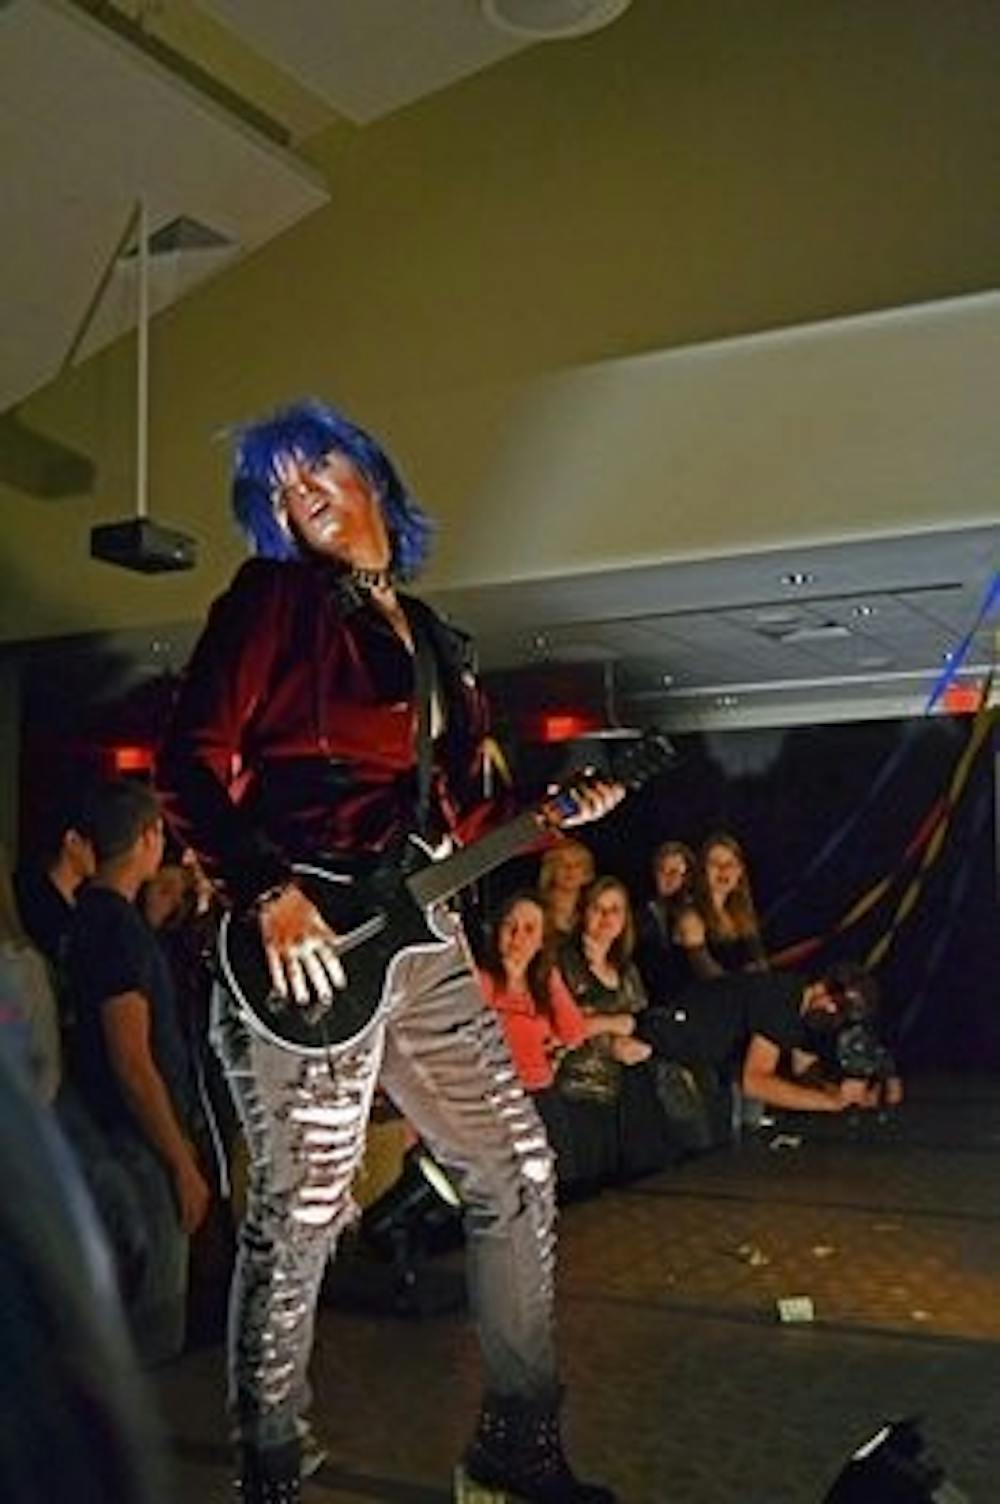 Sky A performs Nickleback's "Rockstar" with a Guitar Hero controller at this year's What-a-Drag! event Friday, March 1. (Raye May / PHOTO EDITOR)